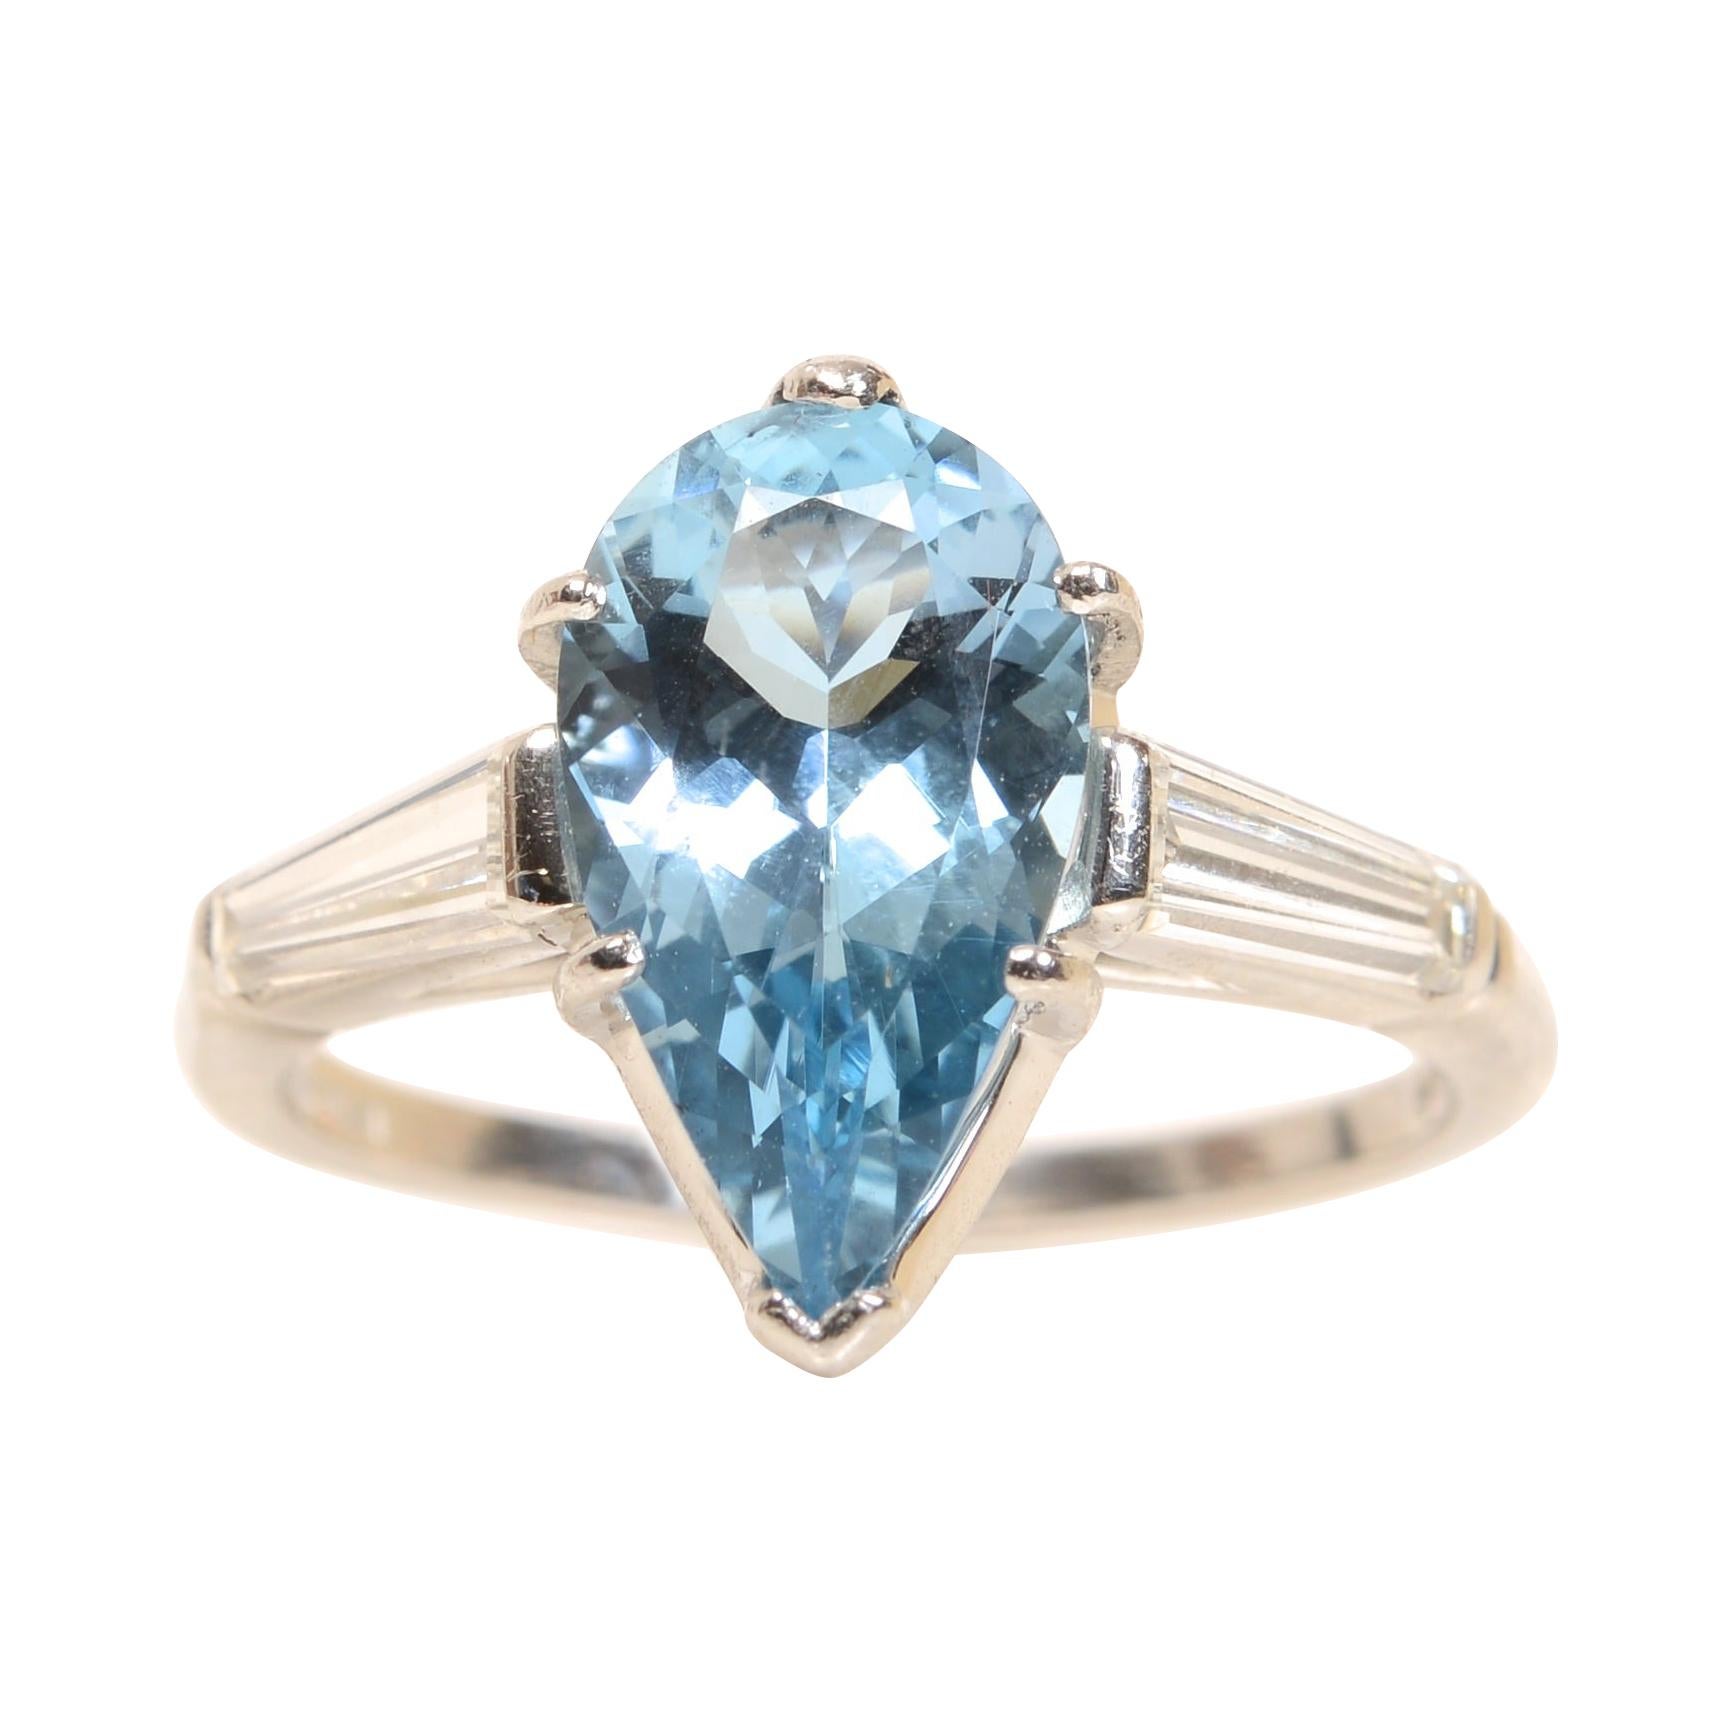 A Pear Shaped 2.73 Carat Aquamarine and Diamond Ring by Black Star & Gorham. Set in Platinum c1950. The history of Black Star & Gorham. Marquand & Barton, were founded in 1810 in New York's Maiden Lane by Erastus Barton and Frederick Marquand. The